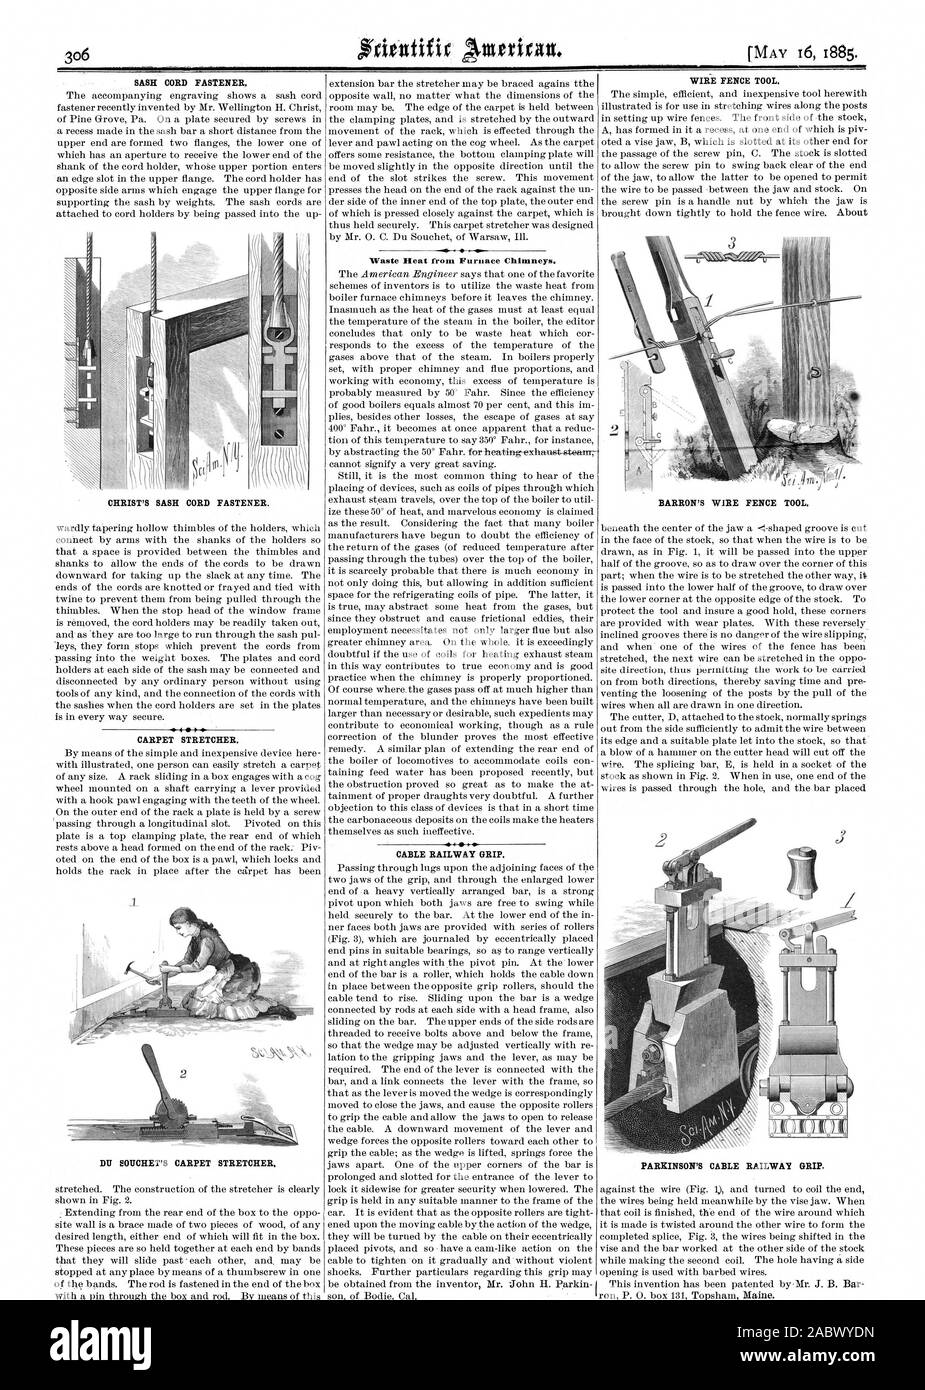 it is made is twisted around the other wire to form the completed splice Fig. 3 the wires being shifted in the vise and the bar worked at the other side of the stock while making the second coil. The hole having a side opening is used with barbed wires.  1885 SCIENTIFIC AMERICAN INC, 1885-05-16 Stock Photo